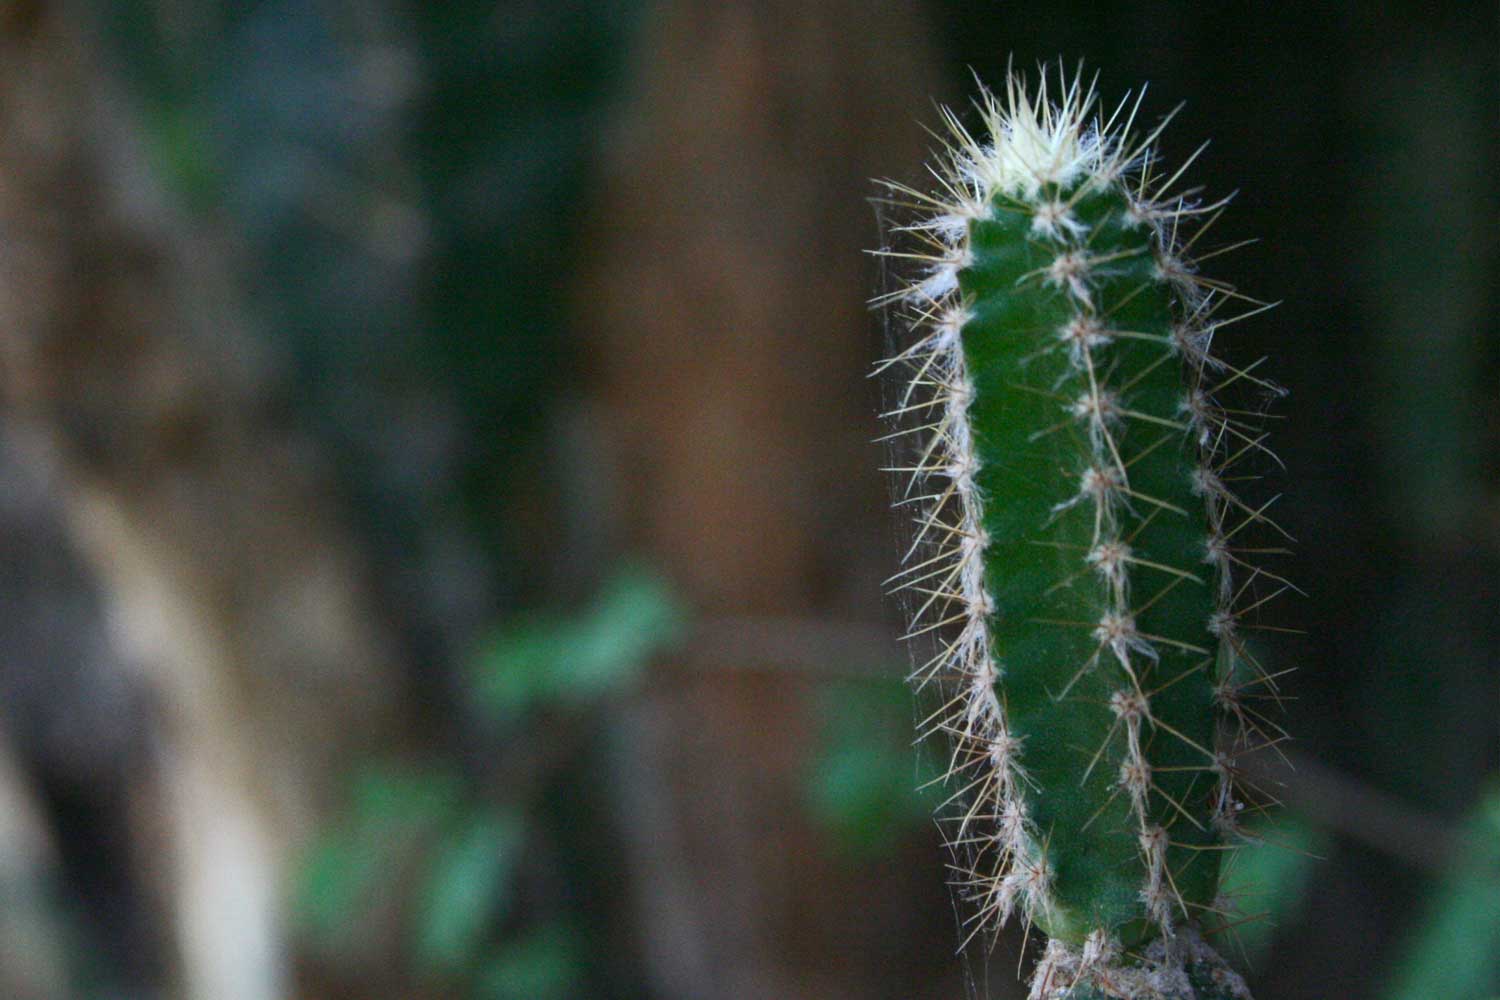 a small cactus in front of many trees